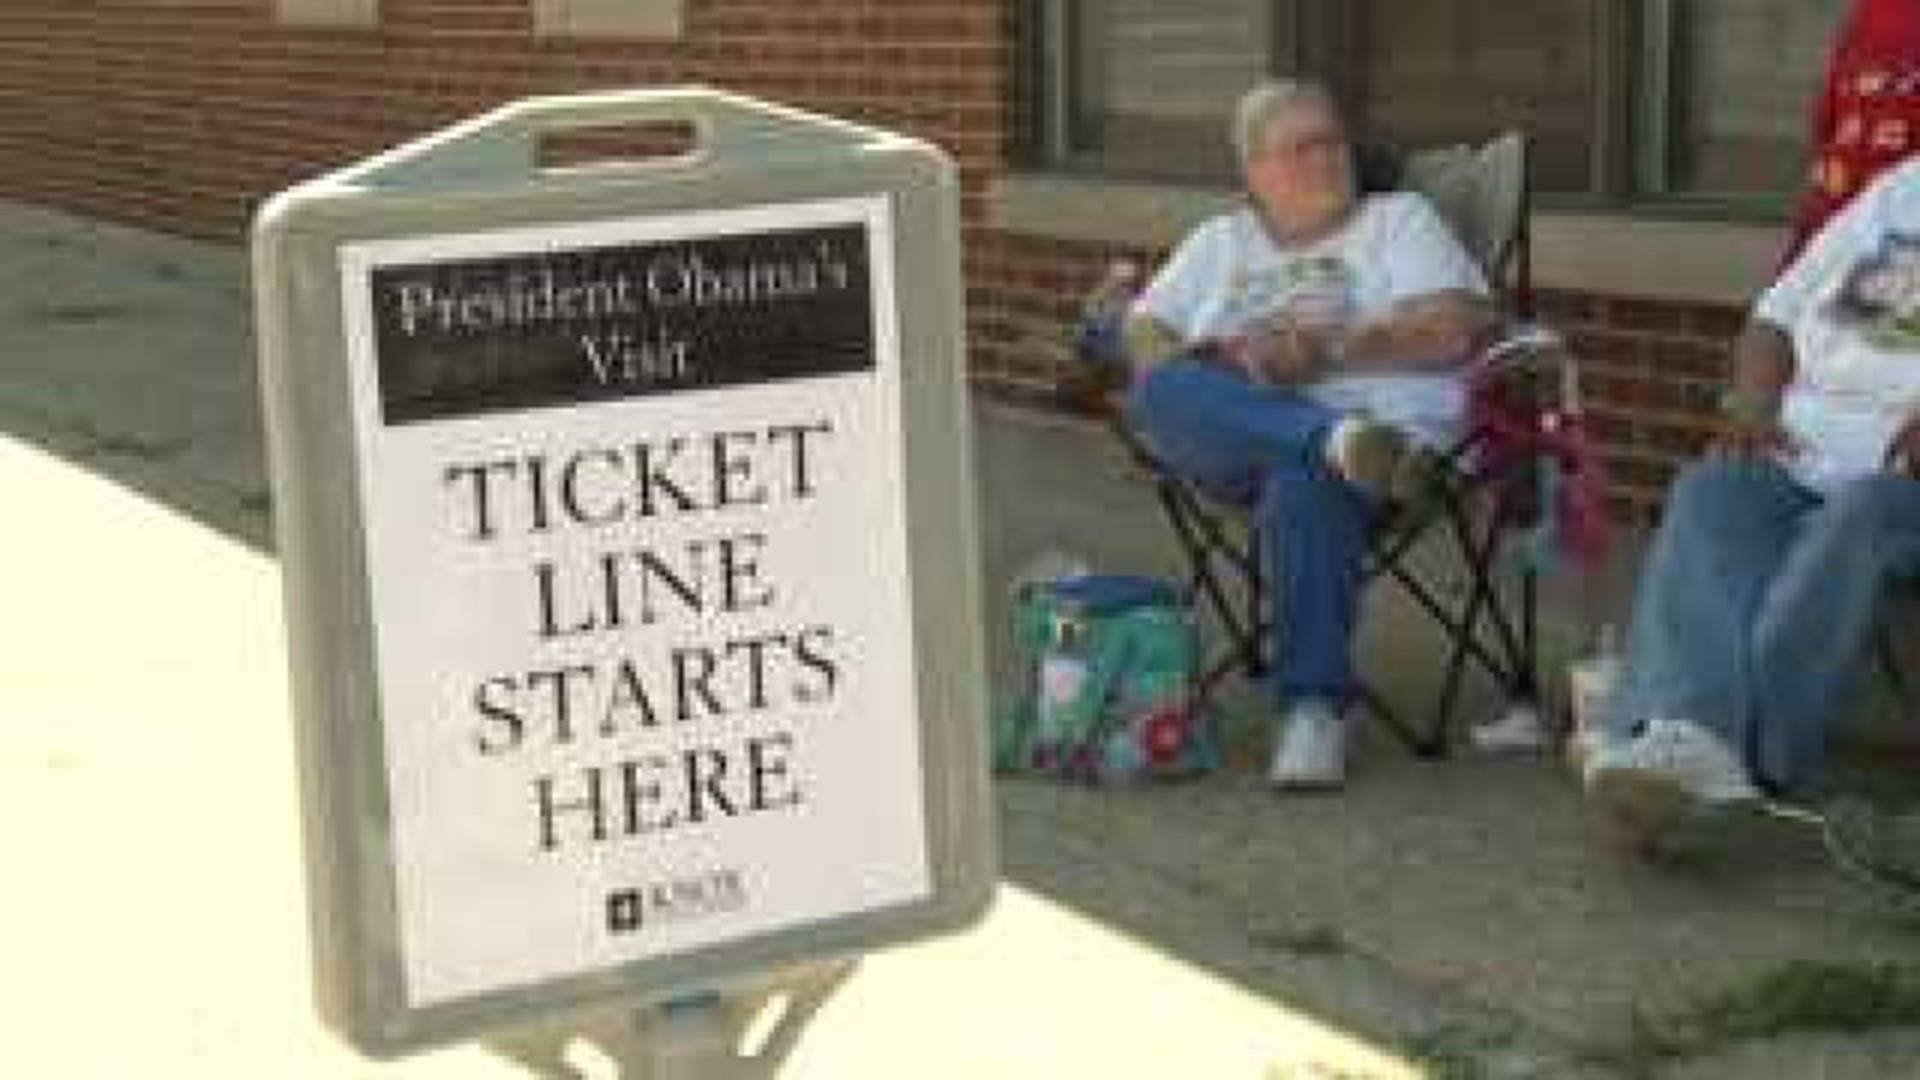 Hundreds line up for Obama tickets in Galesburg